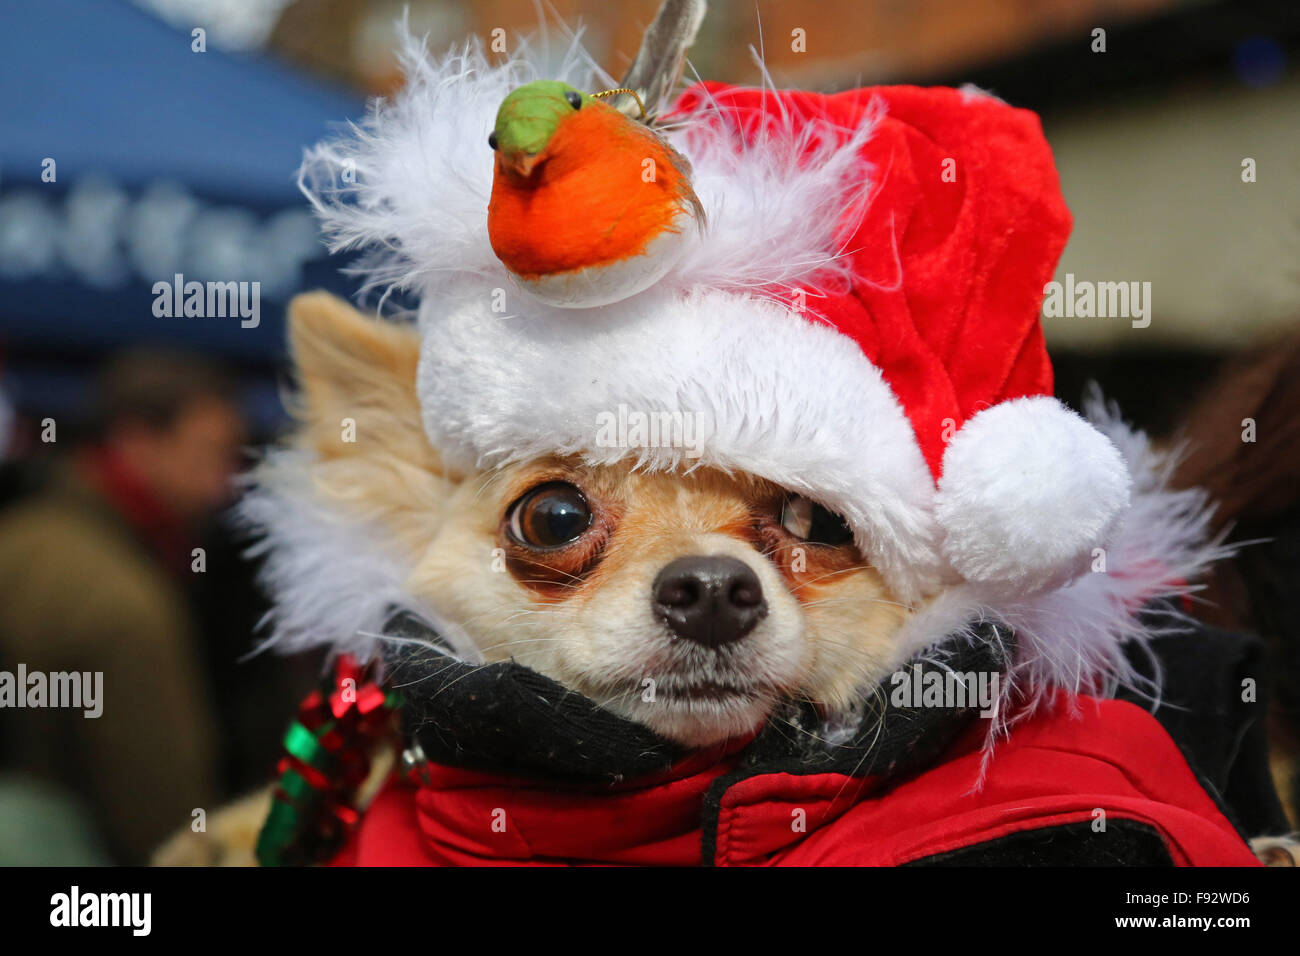 London, UK. 13th December 2015. Ollie the Chihuahua at the All Dogs Matter Santa Paws Christmas Fair where dogs dressed up in their finest Xmas costumes at the Garden Gate Pub iin Hampstead Heath, London. The fair is hosted each year by the charity which finds homes for dogs. Actress Michelle Collins, who is a patron of the charity, was also at the event with her dog Humphrey. Credit:  Paul Brown/Alamy Live News Stock Photo